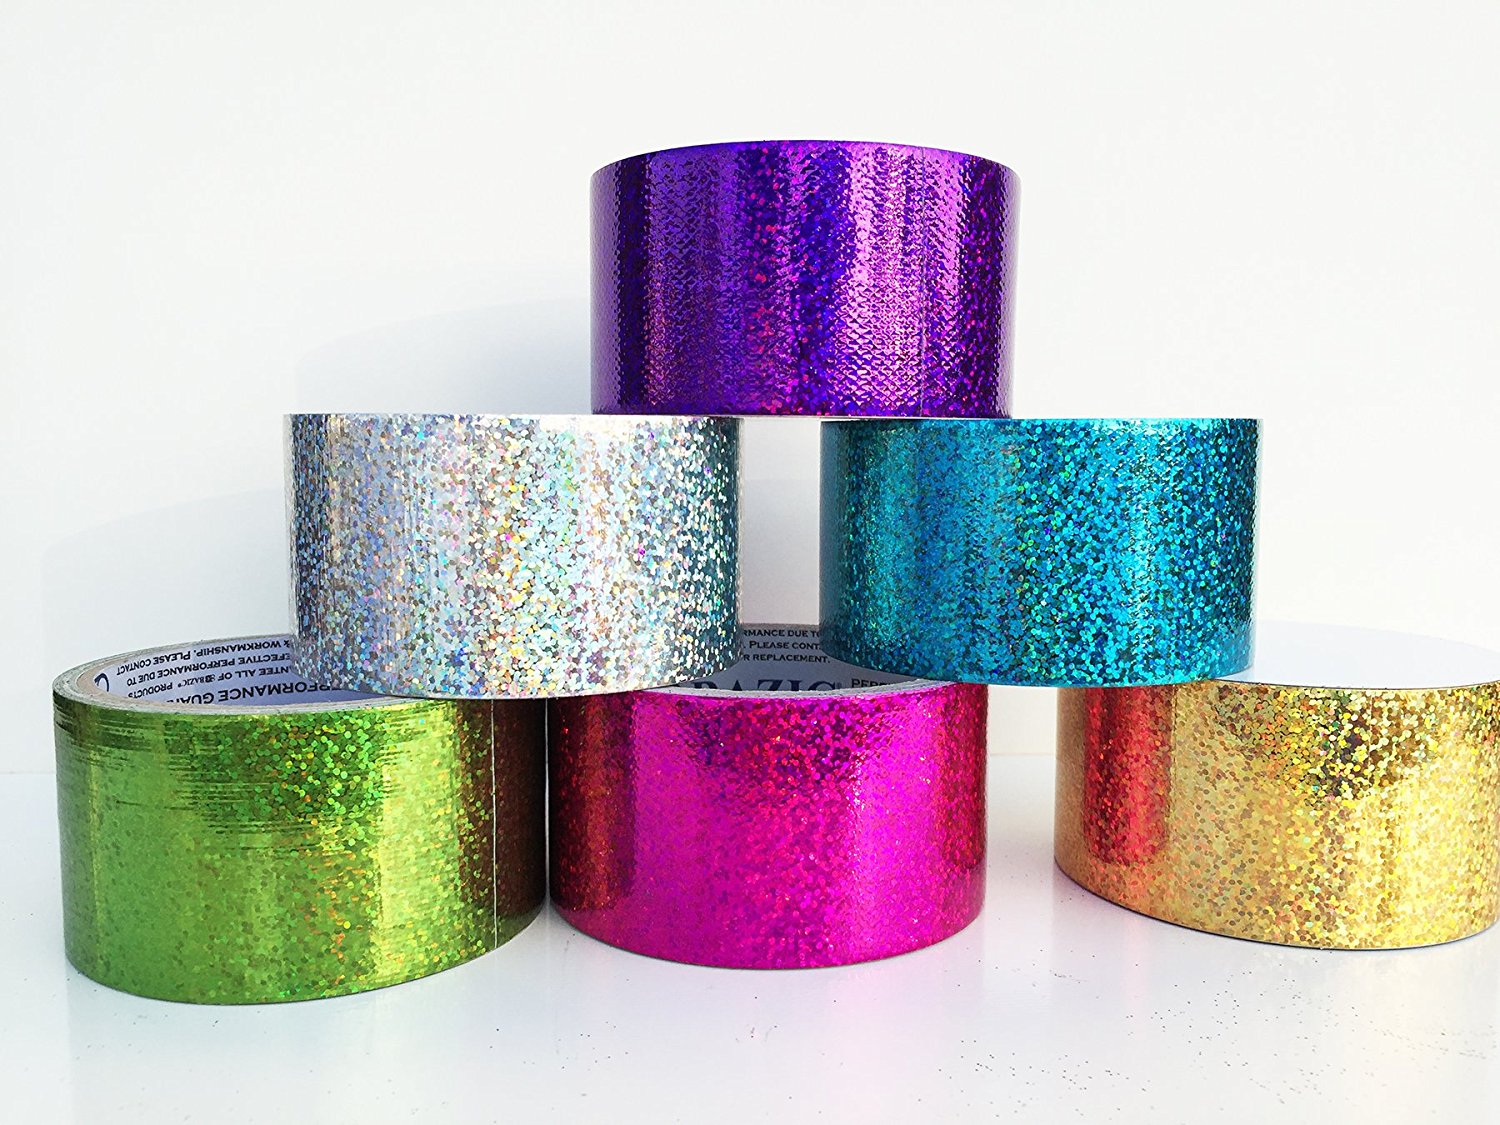 Bazic Duct Tape, Silver - 1 pack